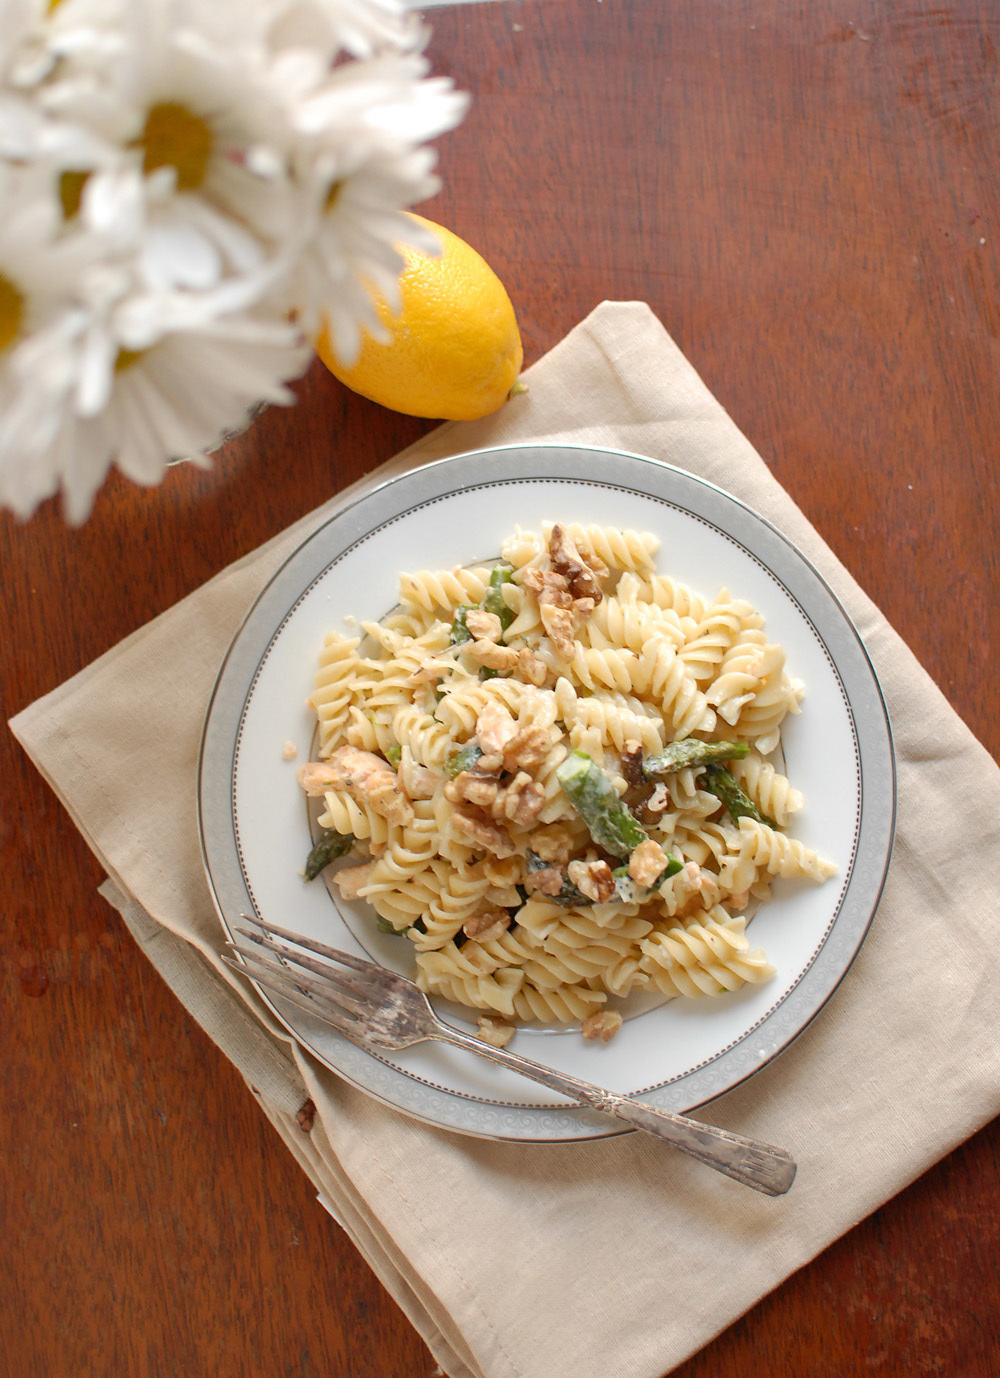 Salmon and Asparagus Pasta with Walnuts